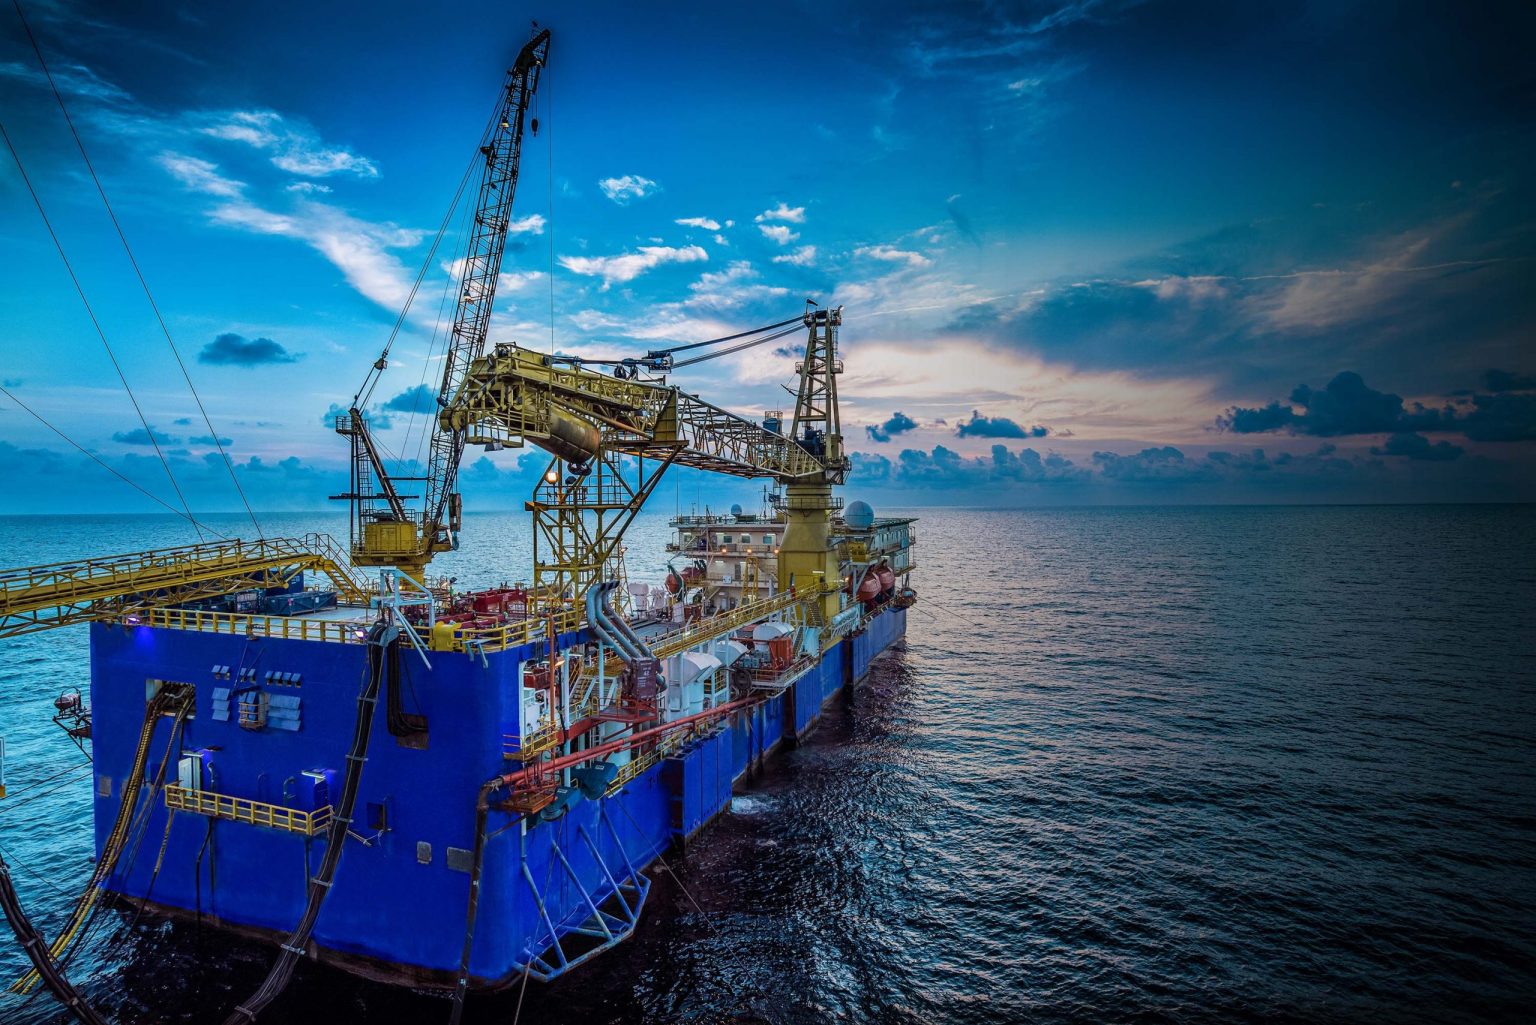 Shot of a drilling boat on the open ocean, belonging to Sapura Drilling company